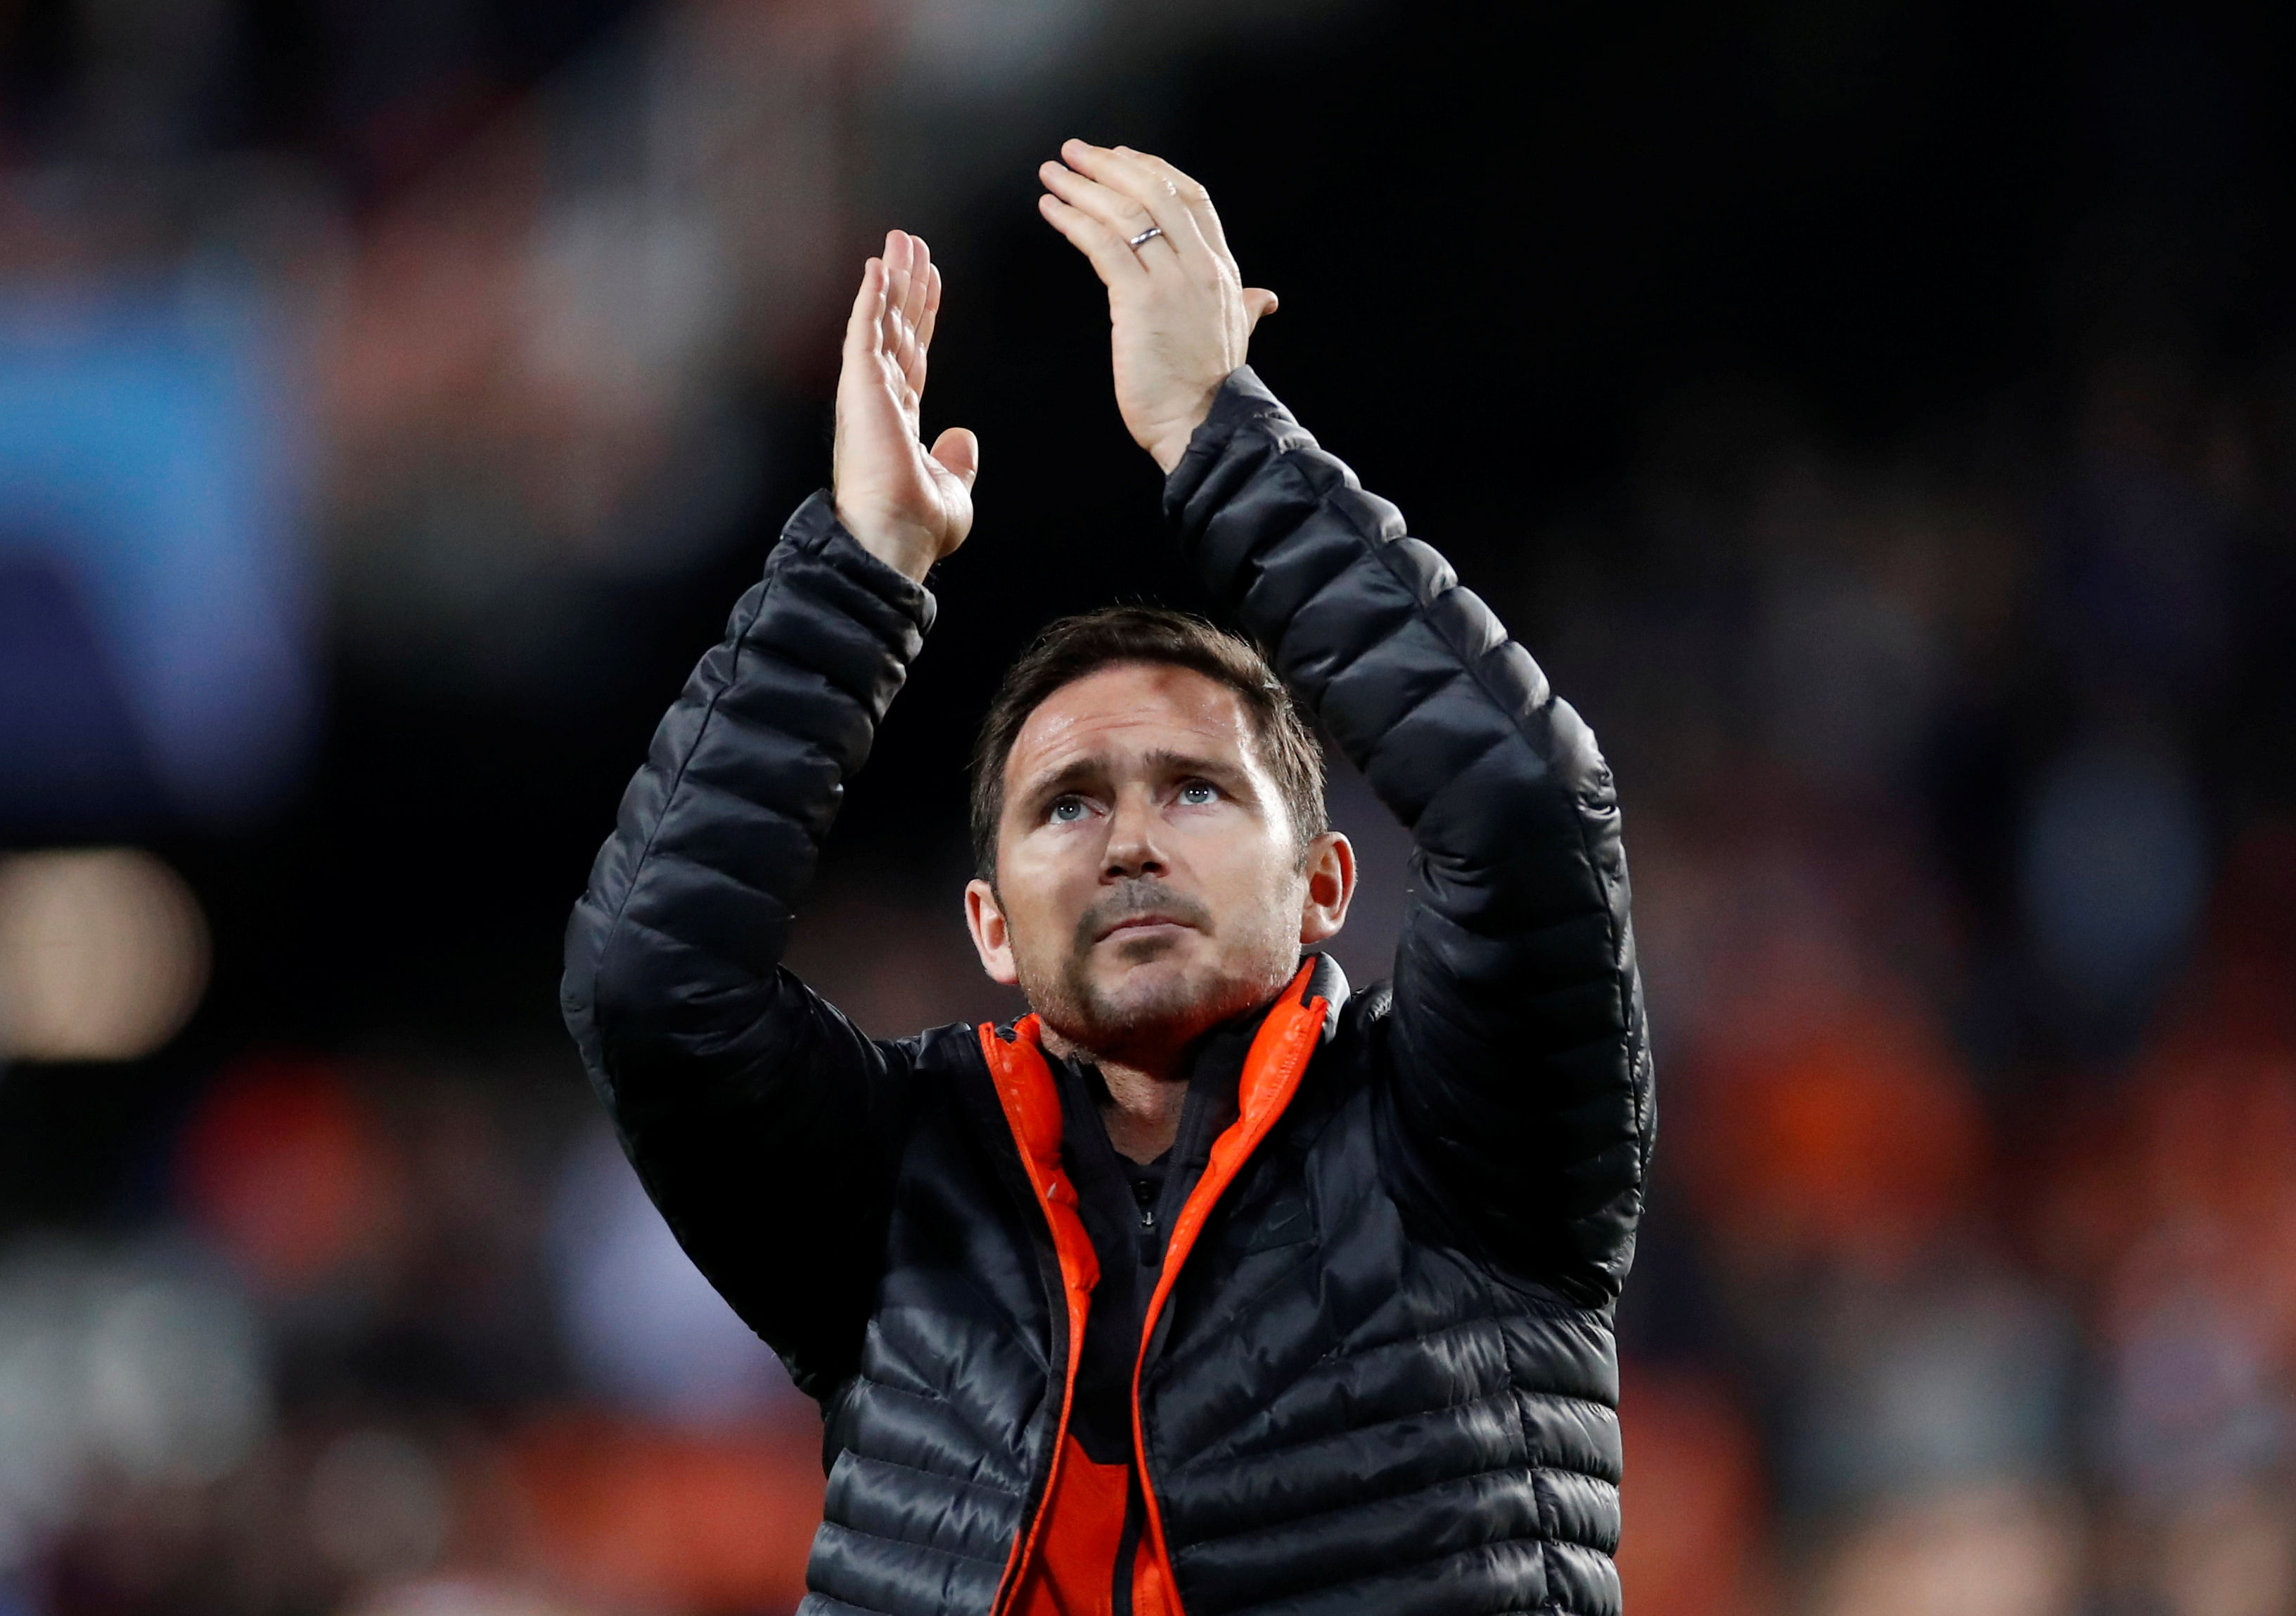 Chelsea manager Frank Lampard applauds fans after the match. (Reuters Photo)